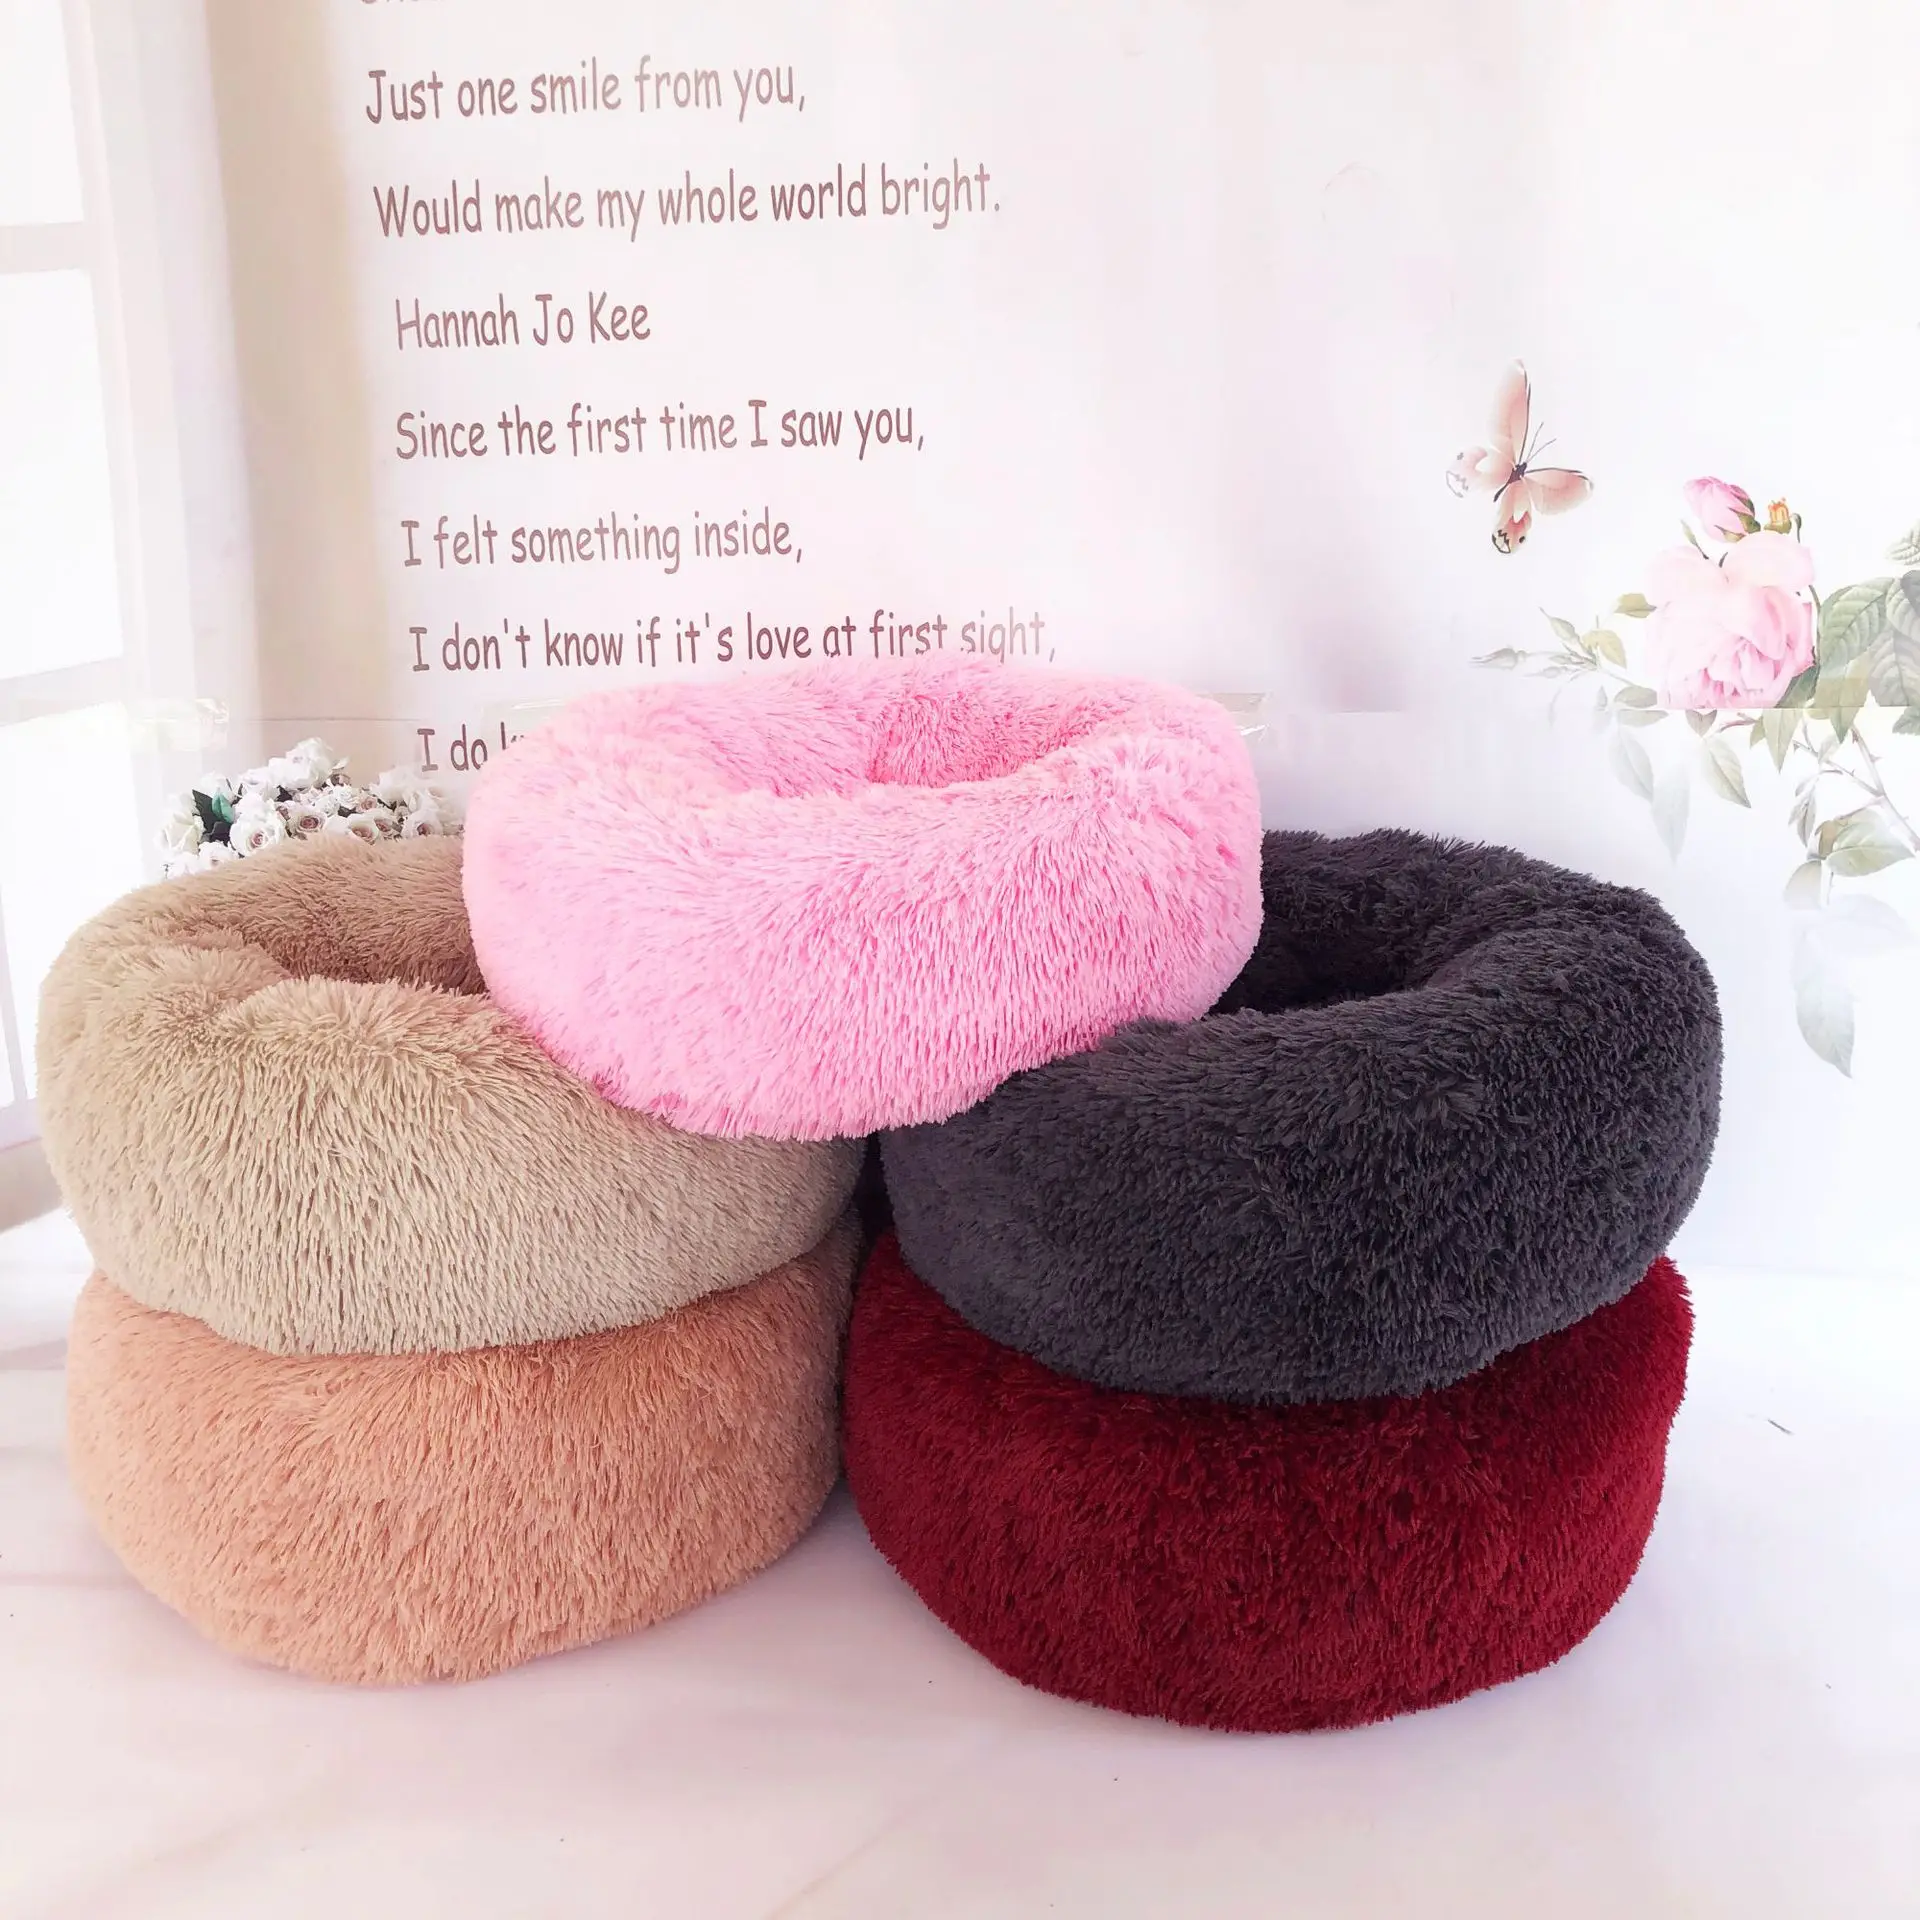 Luxury Soft Plush Dog Bed Round Shape Sleeping Bag Kennel Cat Puppy Sofa Bed Pet House Winter Warm Beds Cushion Superior Comfort